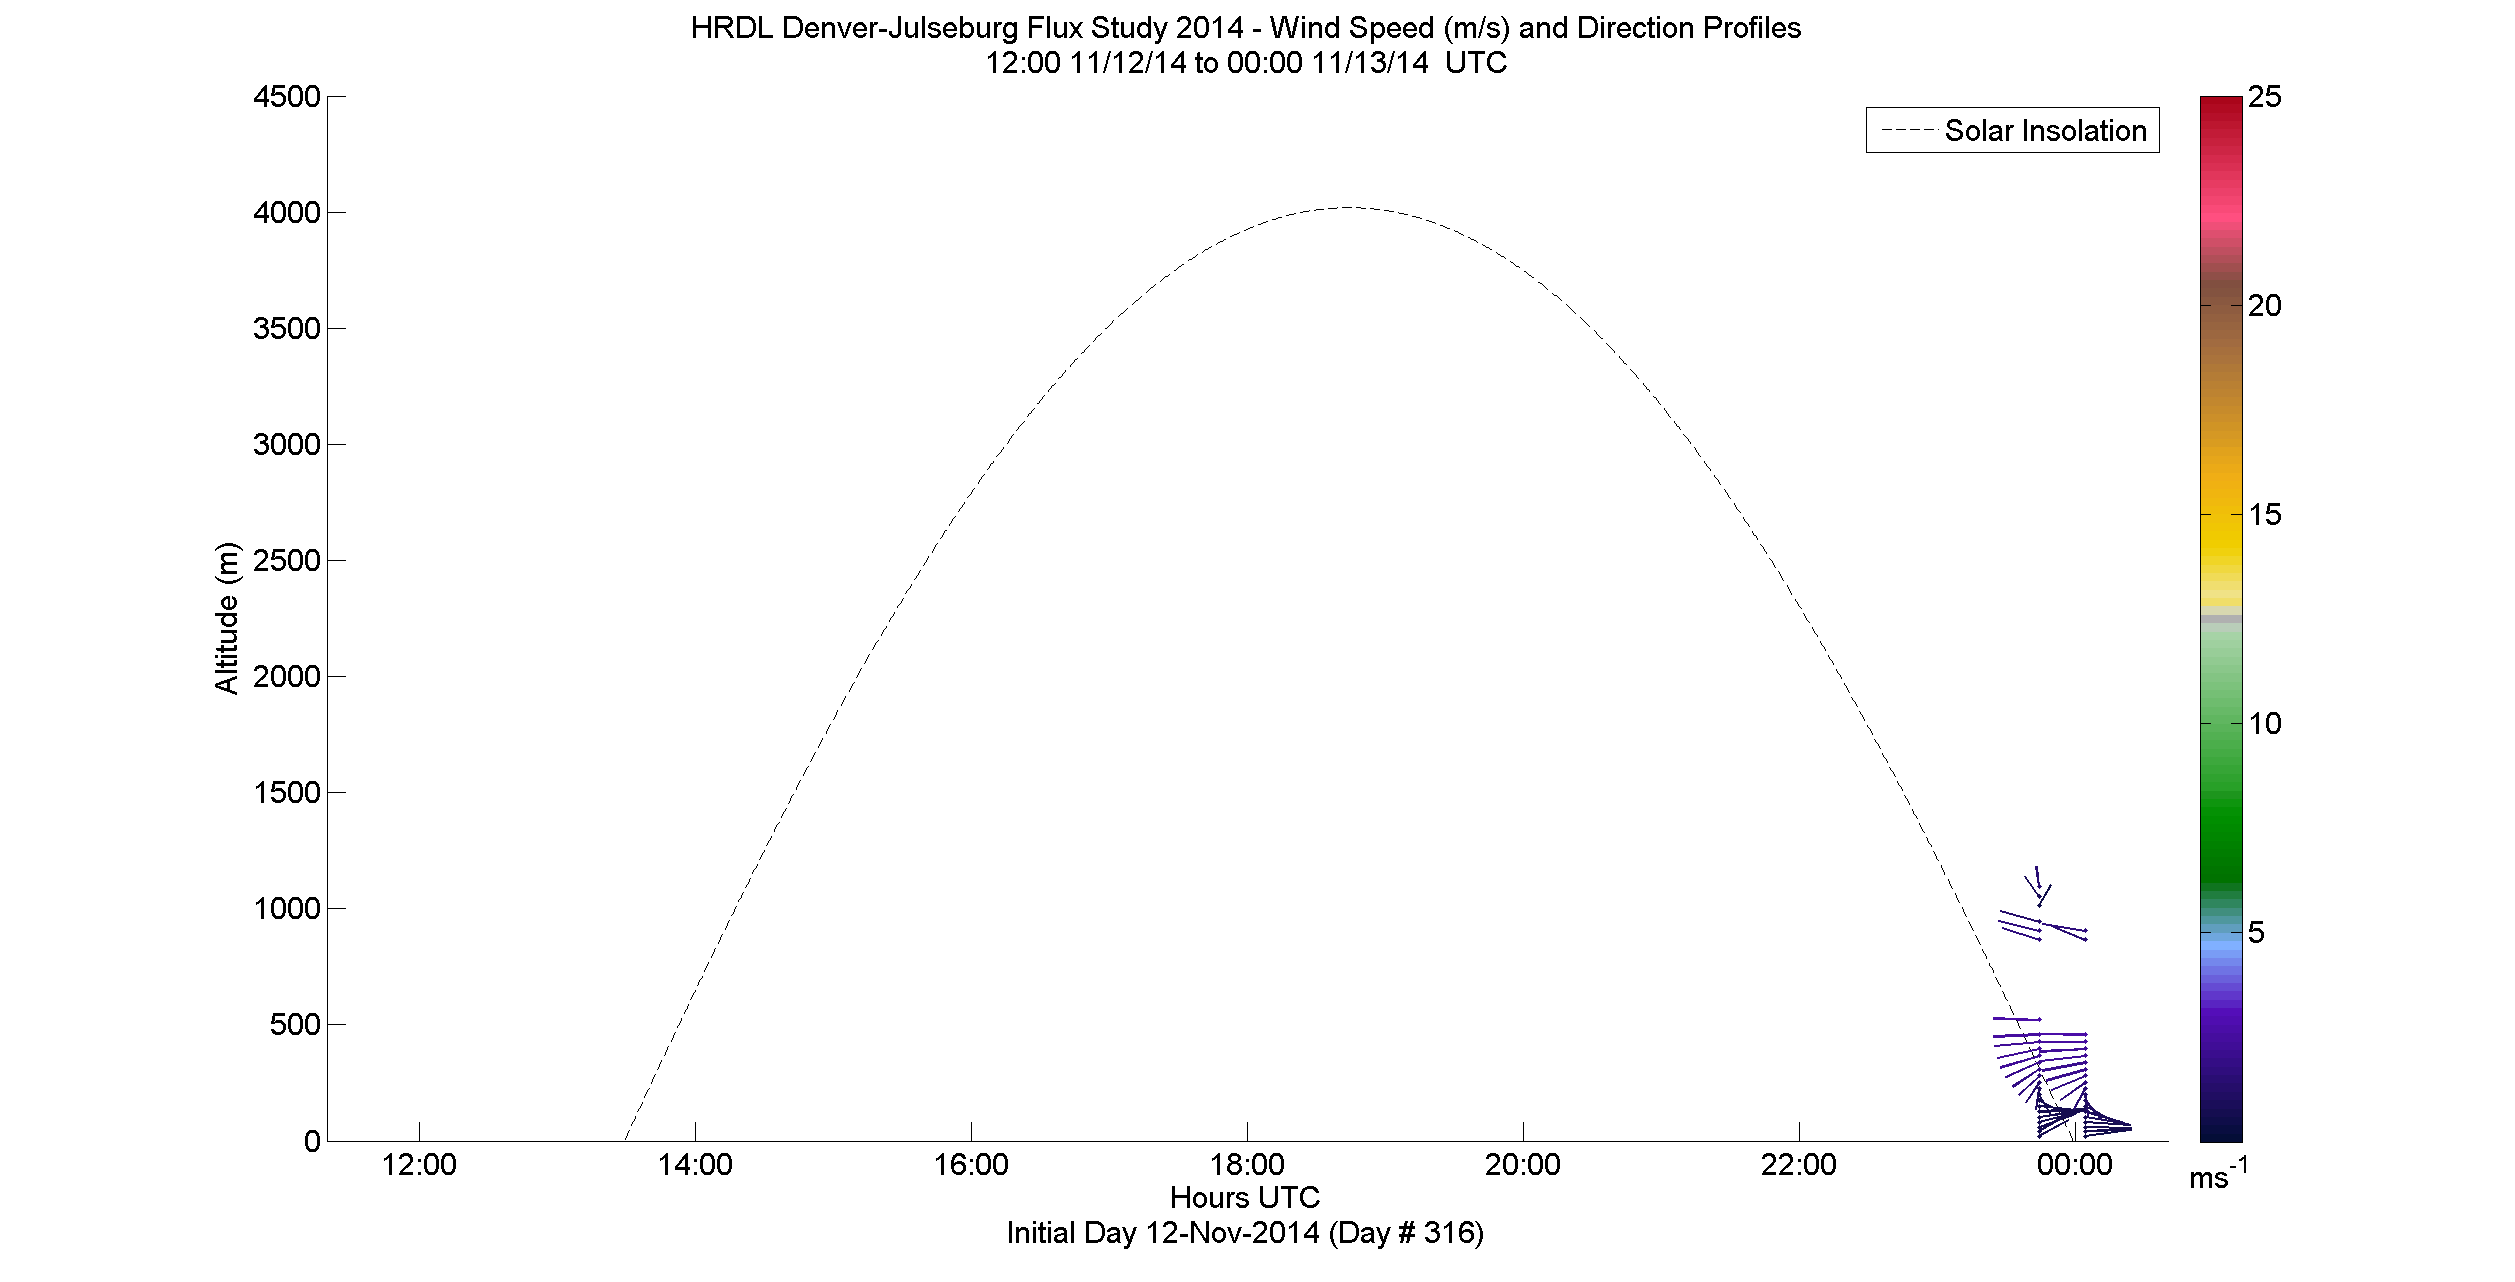 HRDL speed and direction profile - November 12 pm